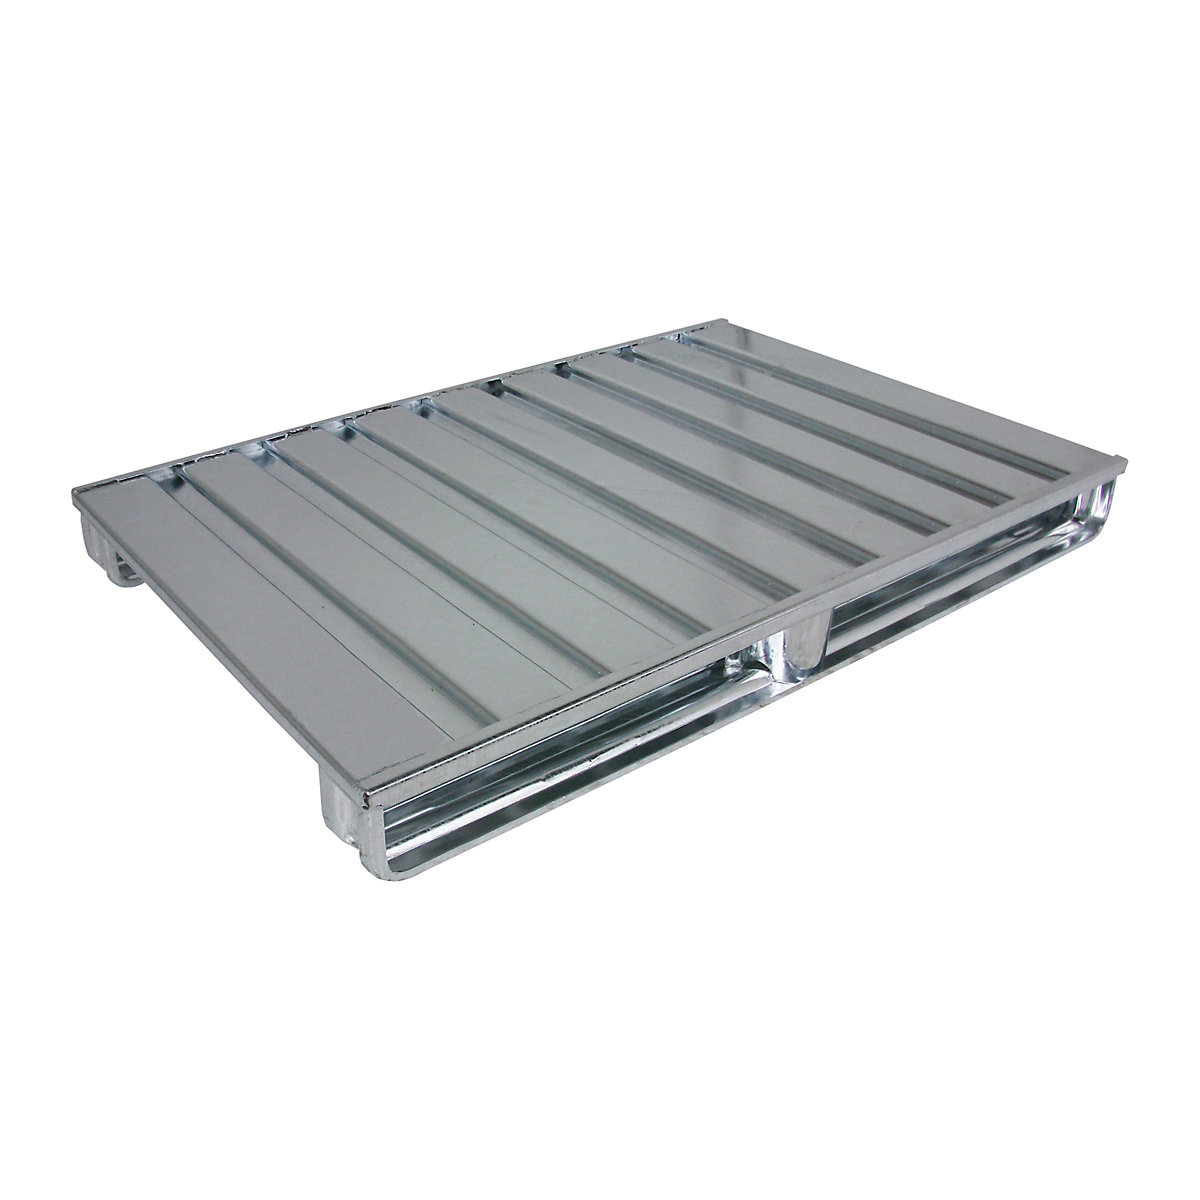 Flat steel pallet – Heson, LxW 1200 x 800 mm, max. load 2000 kg, zinc plated, 10+ items-3